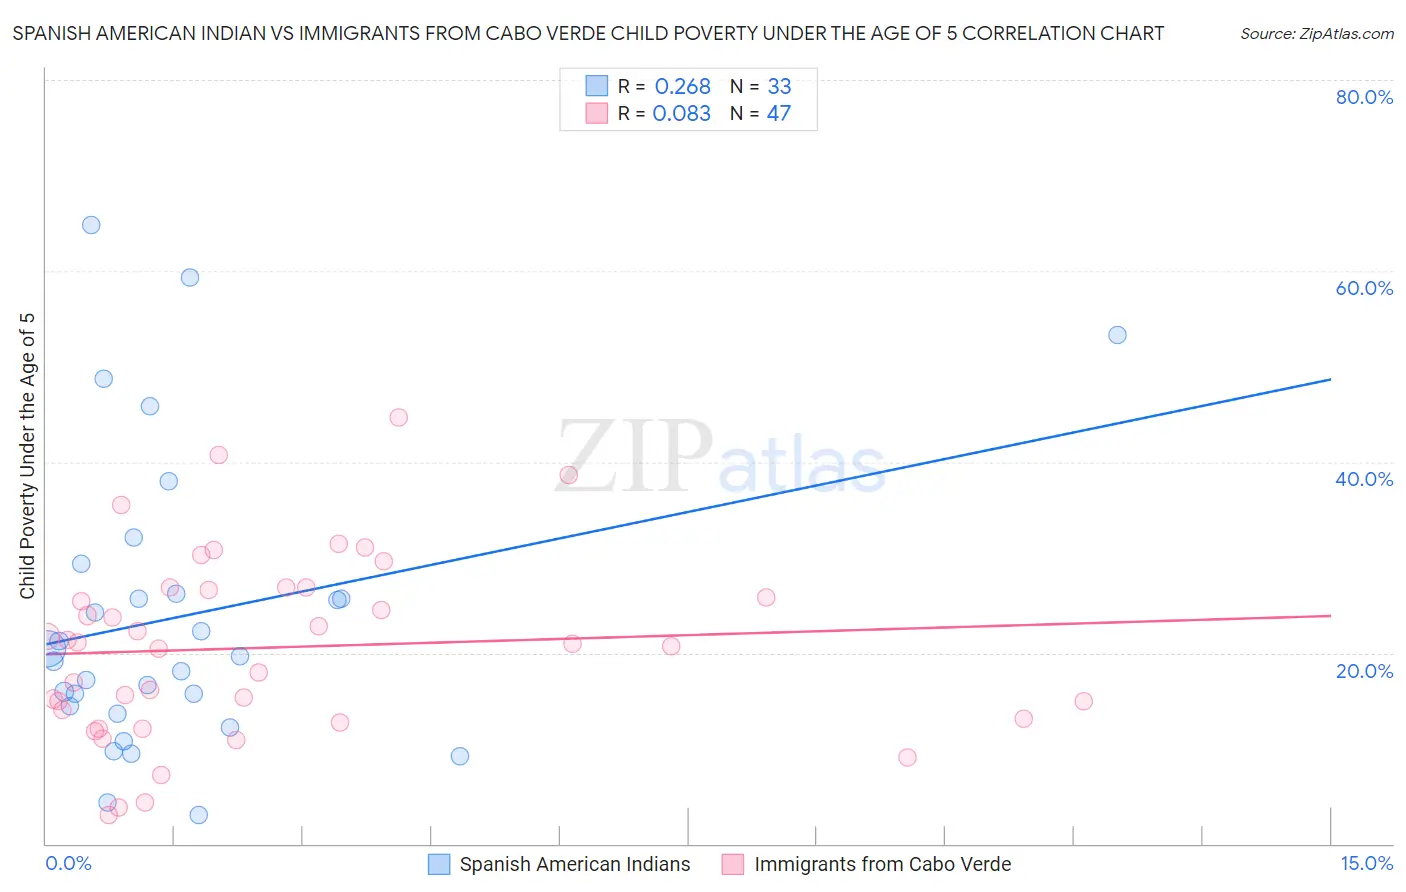 Spanish American Indian vs Immigrants from Cabo Verde Child Poverty Under the Age of 5